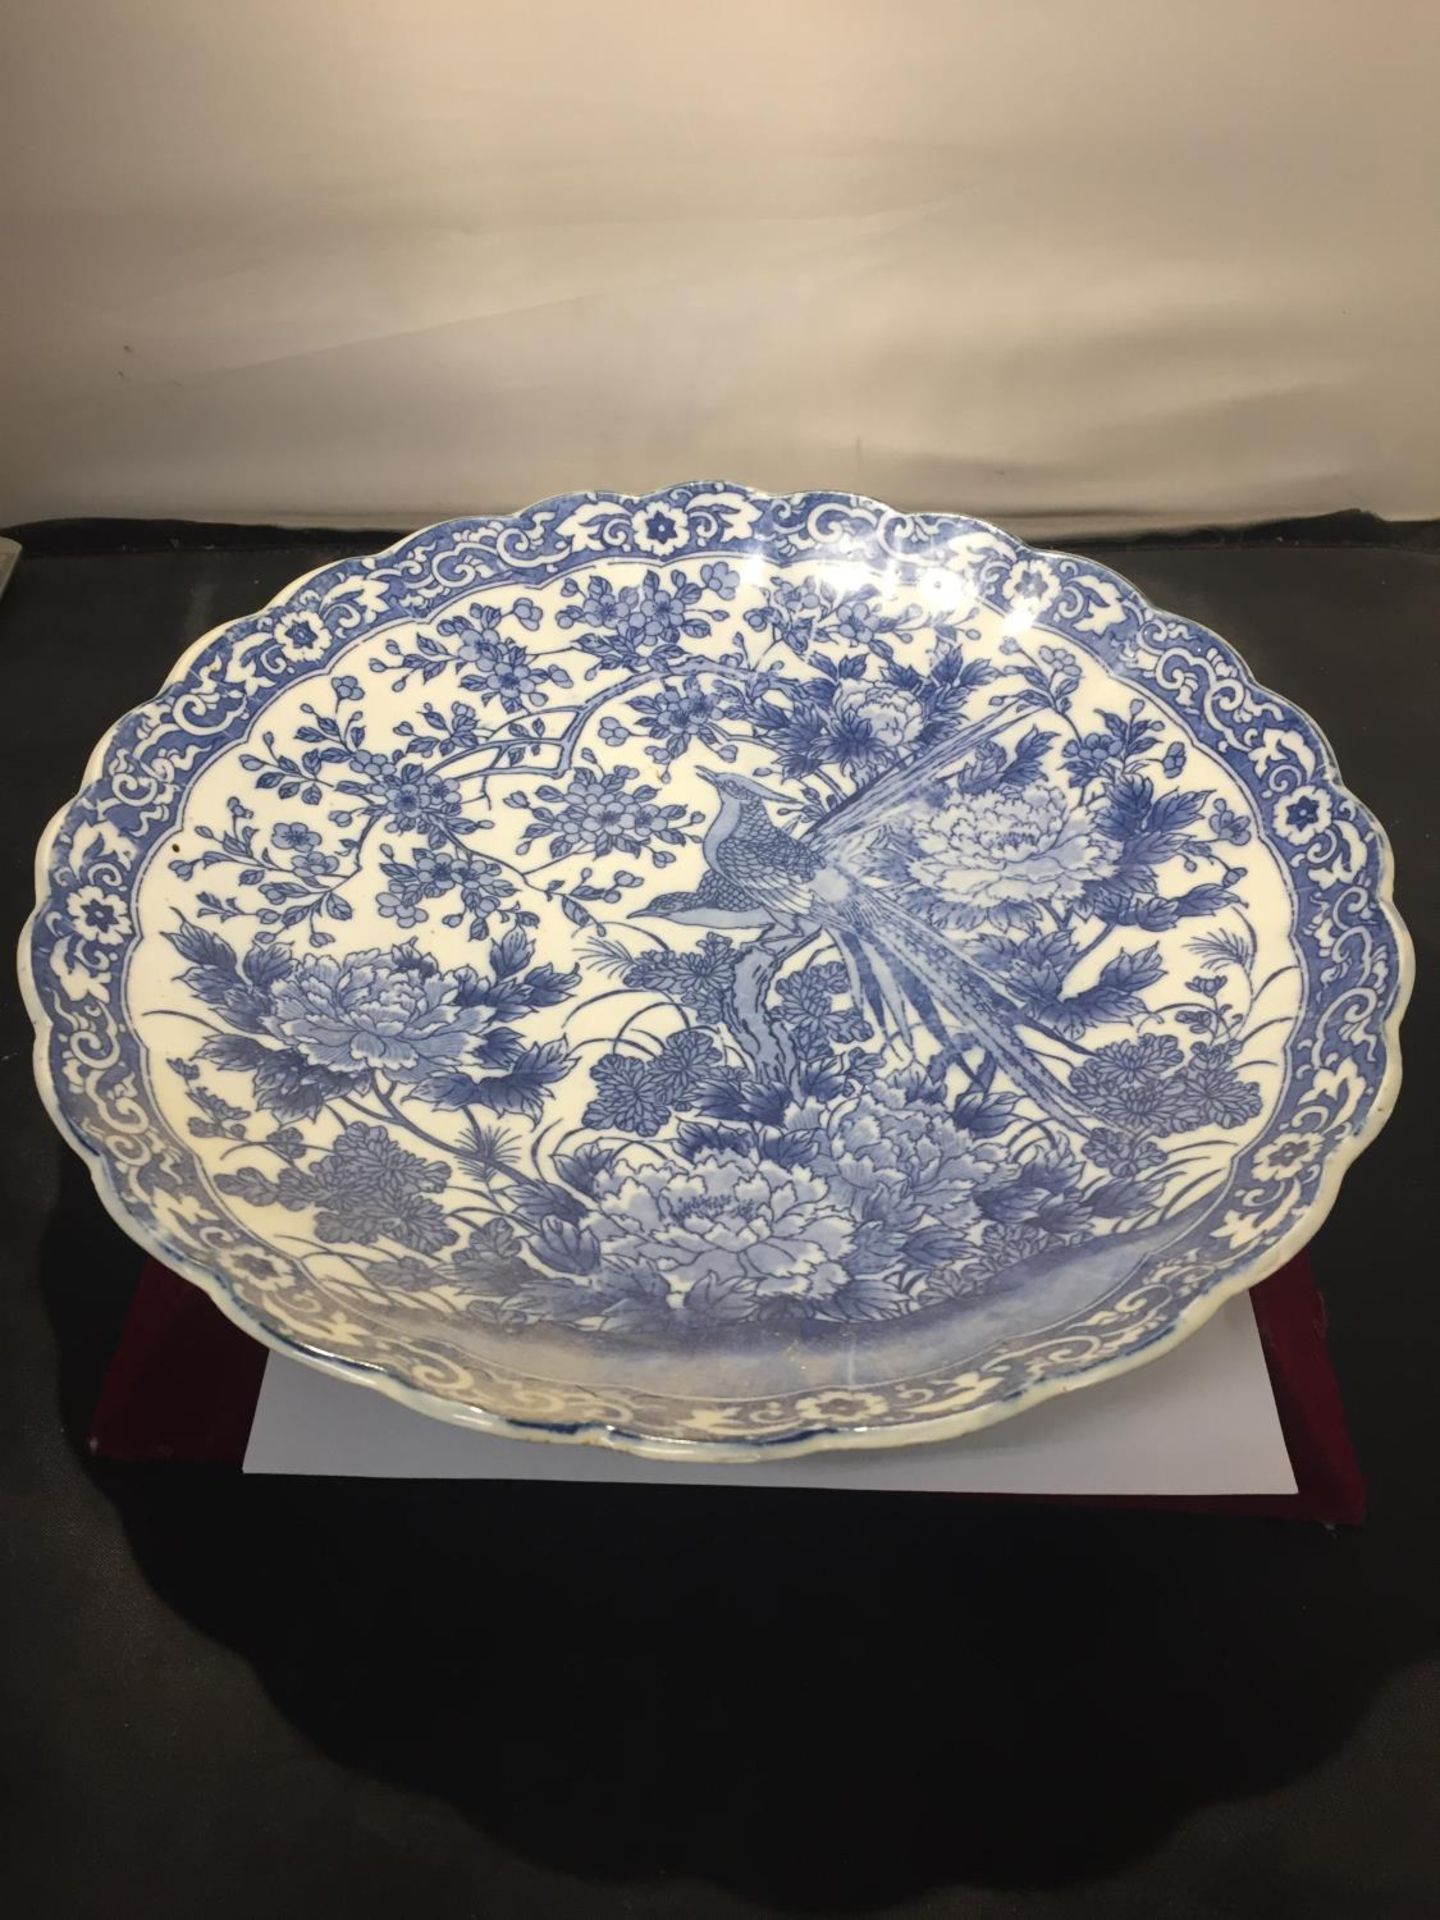 A LARGE JAPANESE BLUE AND WHITE CHARGER DIAMETER 12 INCHES